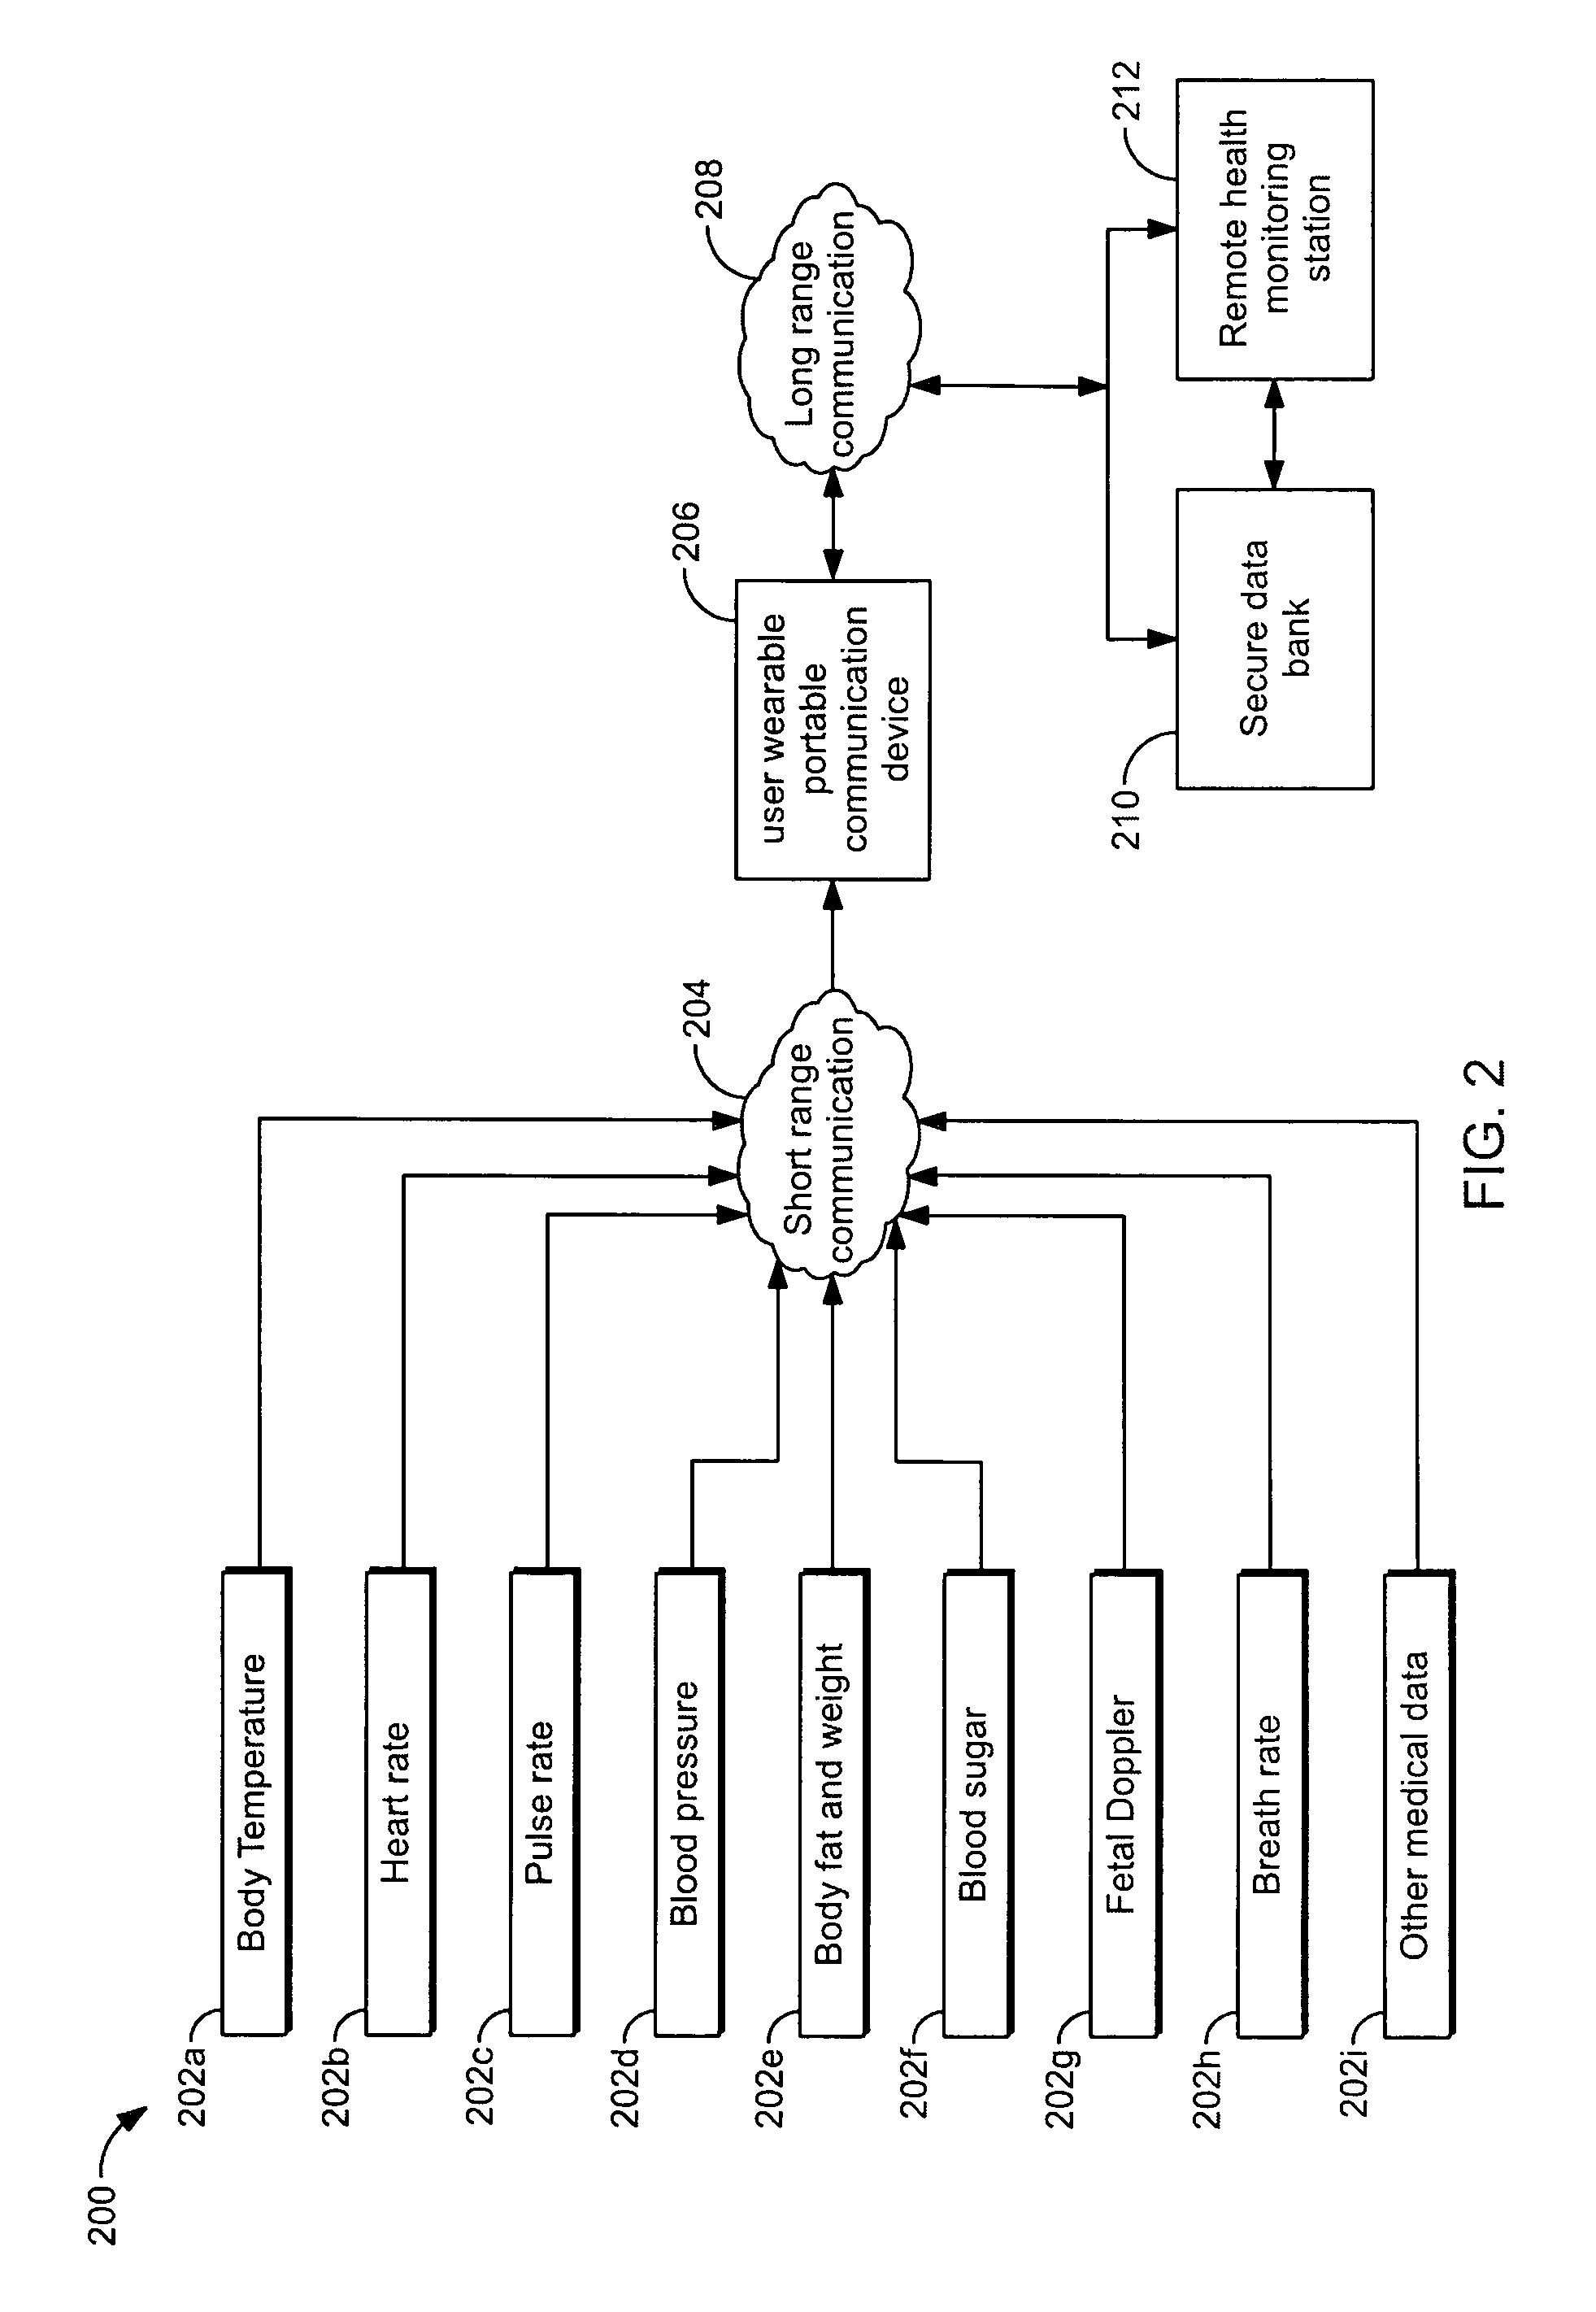 User wearable portable communication device for collection and transmission of physiological data